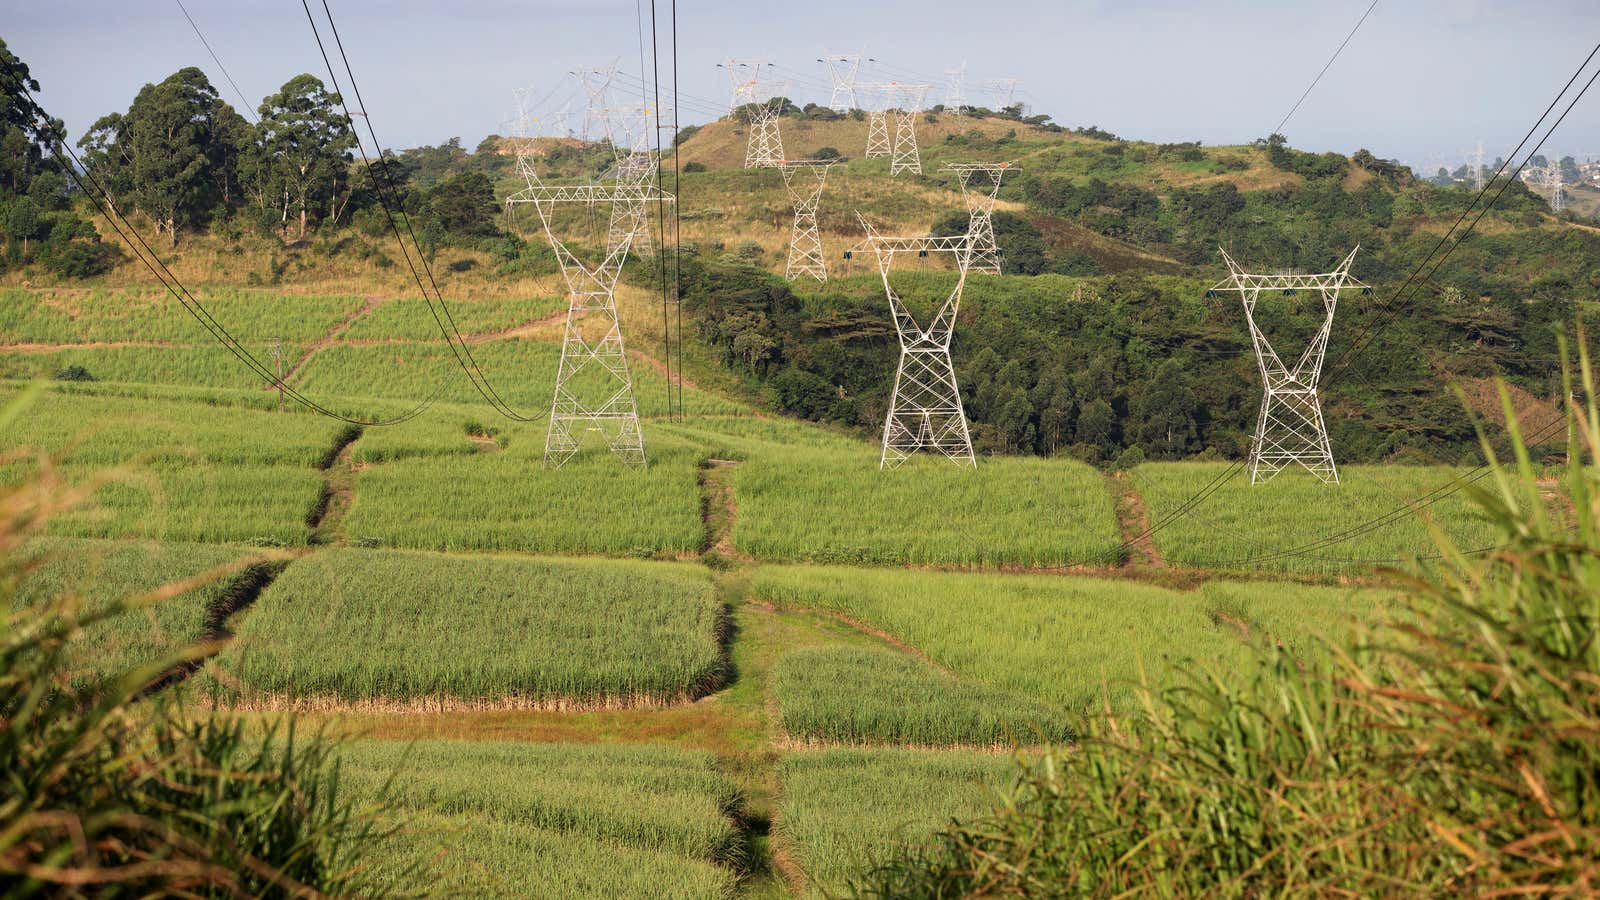 Power lines supplying electricity by stated owned Eskom run through sugar cane fields on a Tongaat Hulett farm in Shongweni, South Africa 